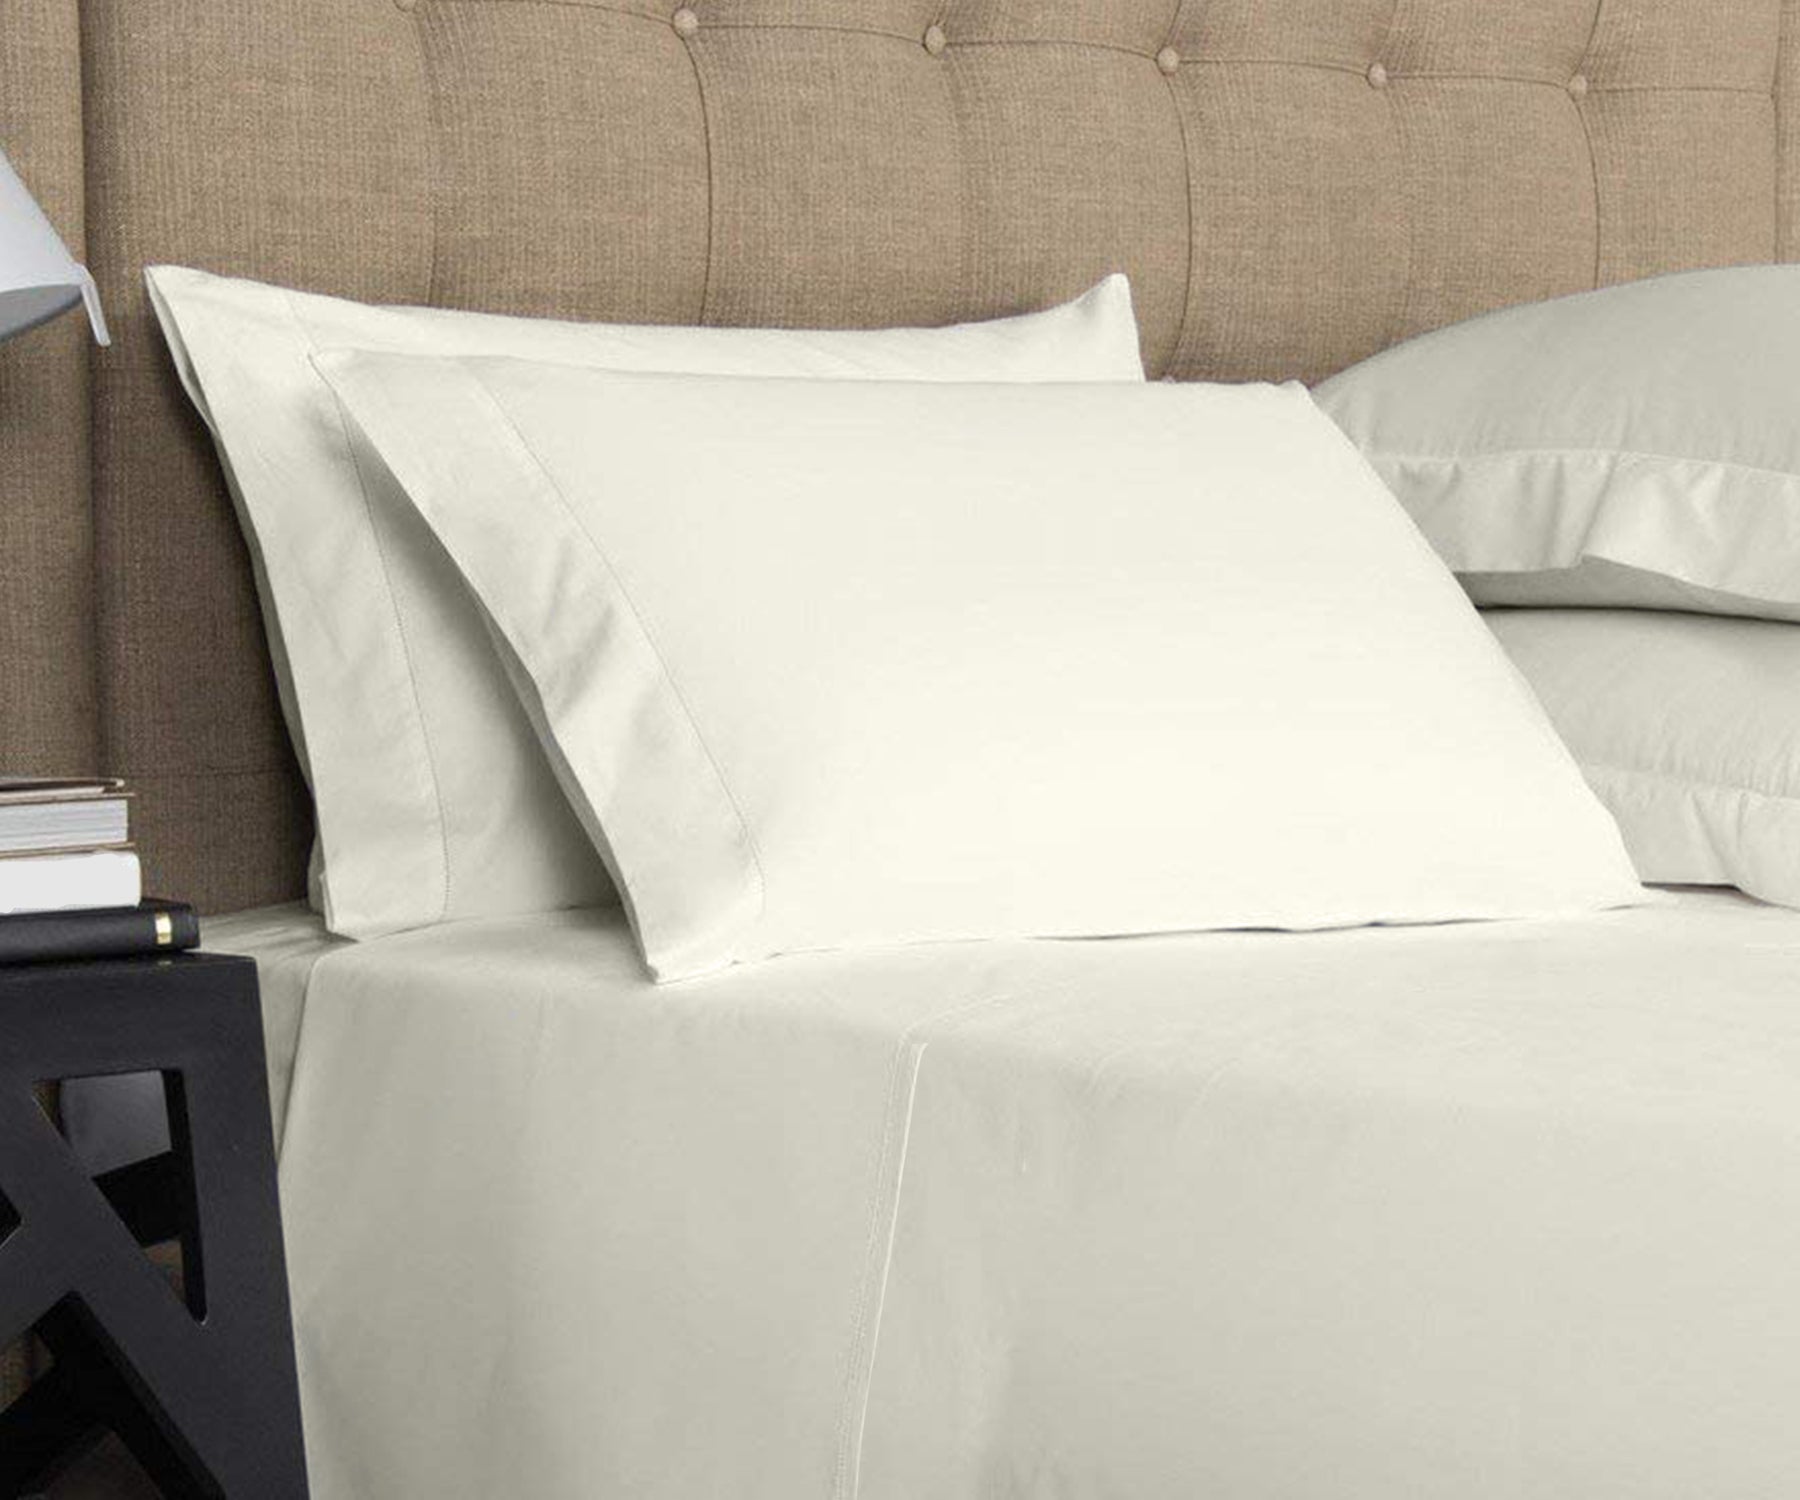 Queen fitted sheet sold separately, allowing you to mix and match your bedding.